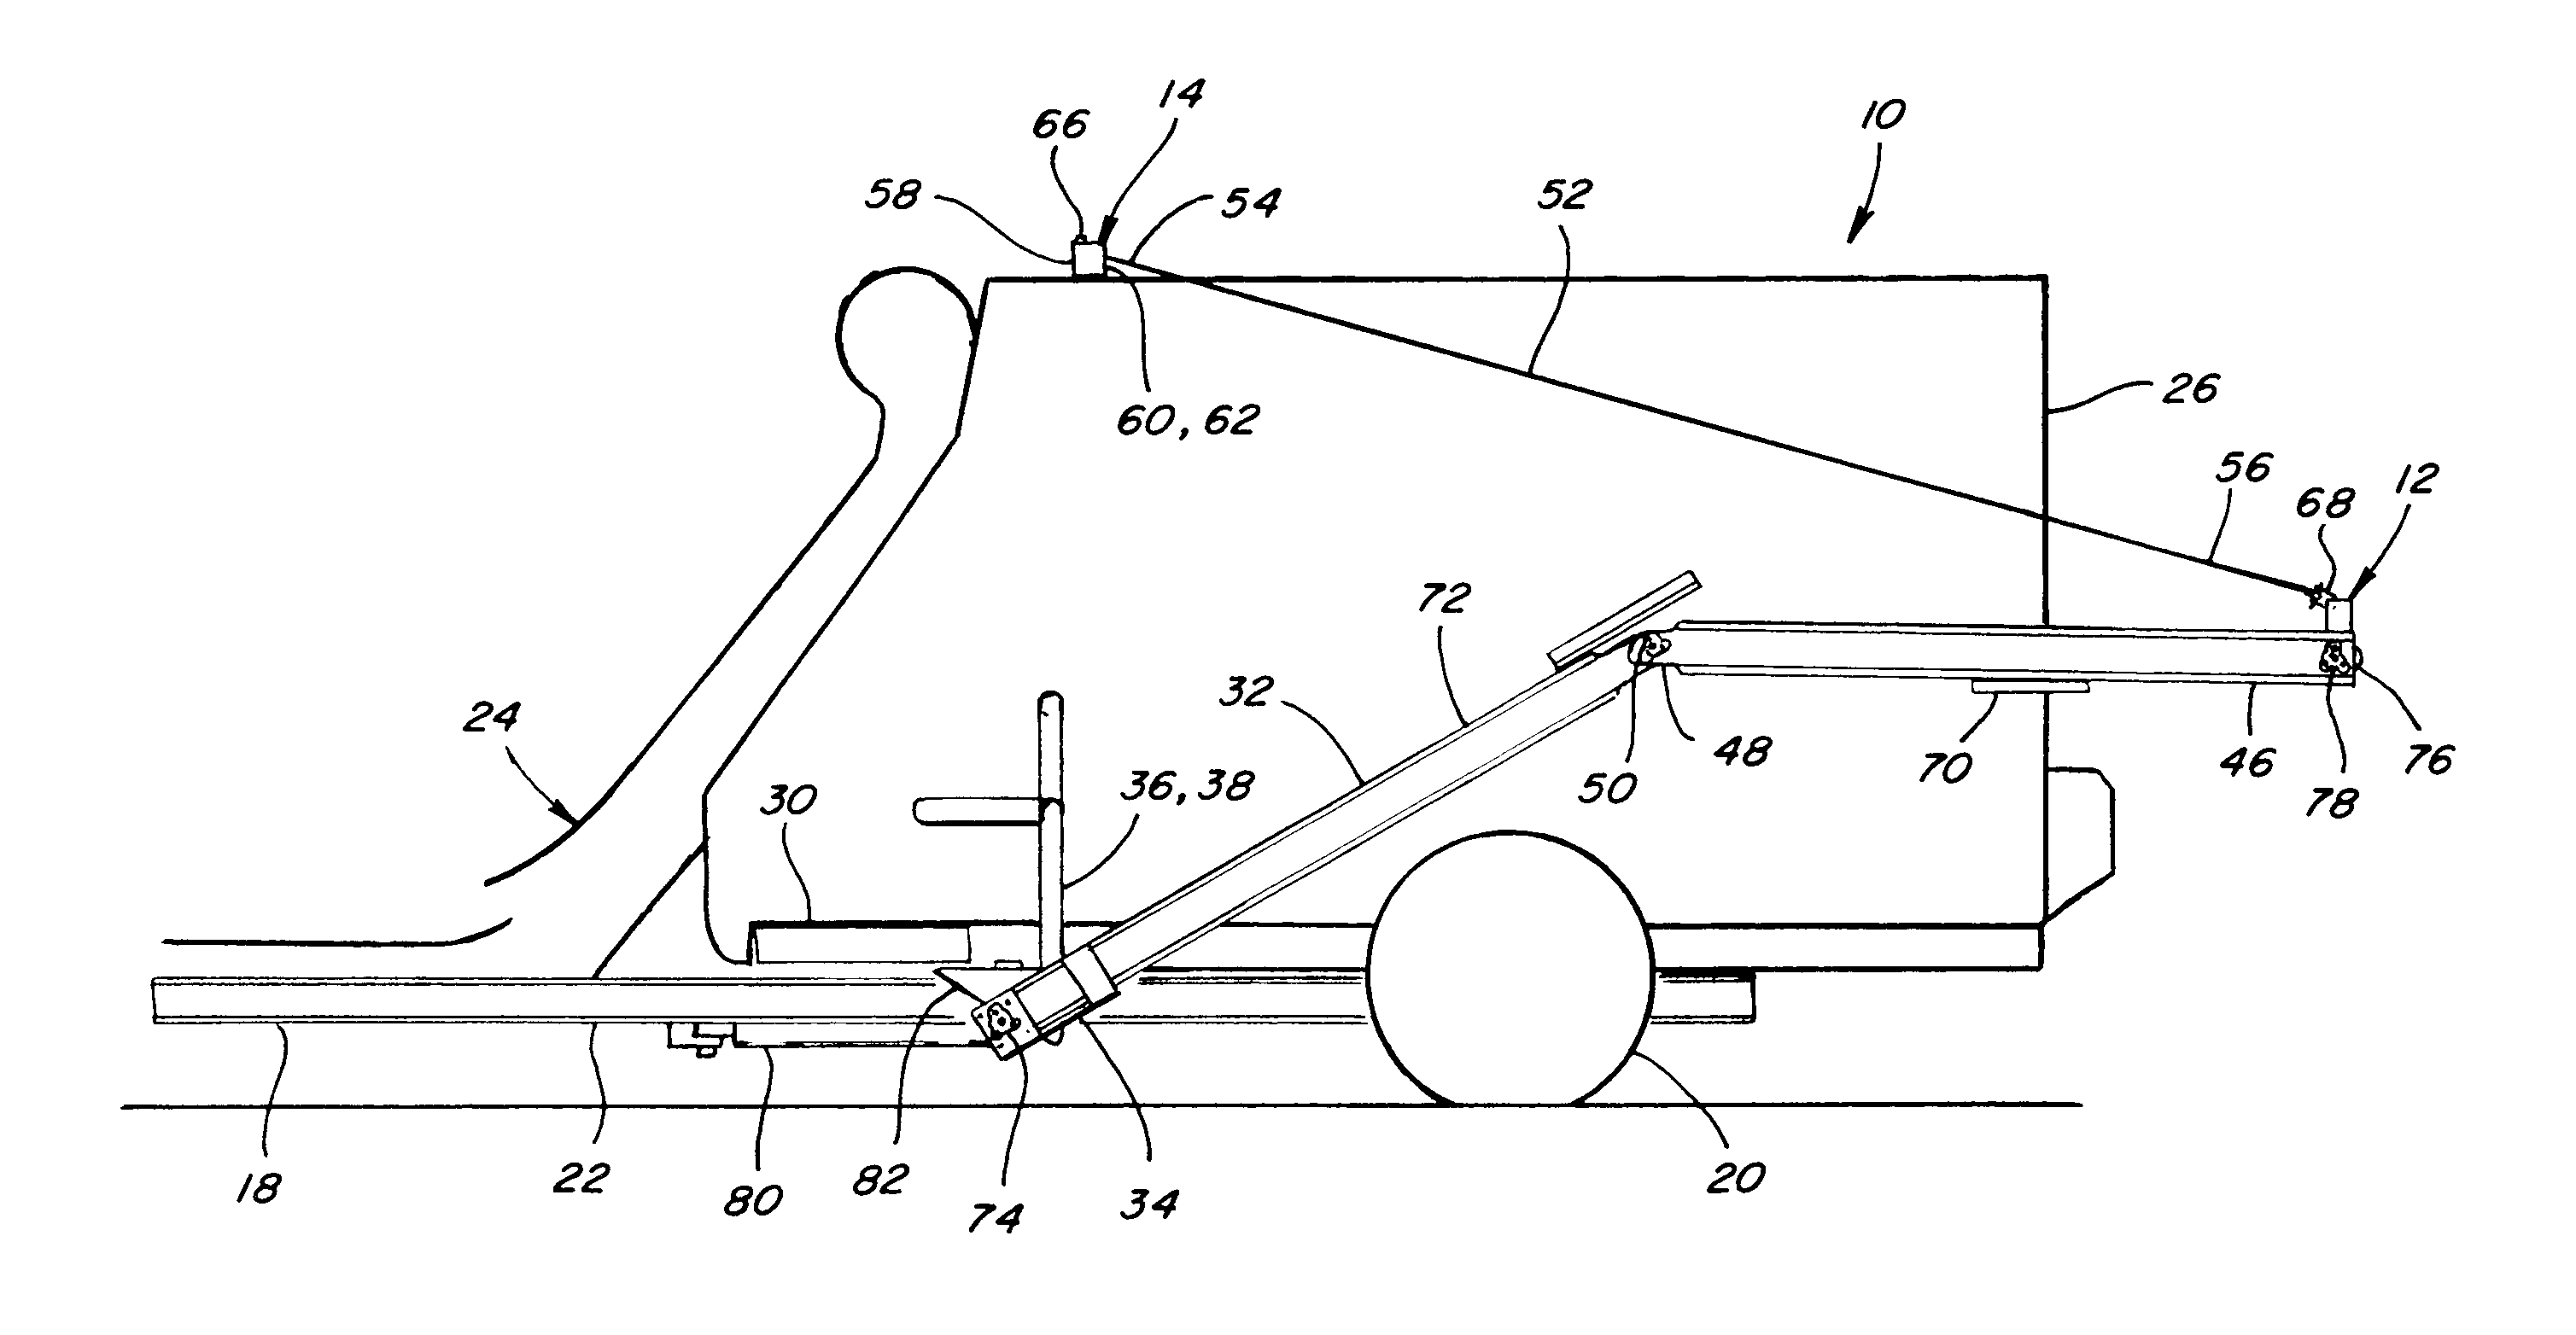 Unloader system with cam operated raise system